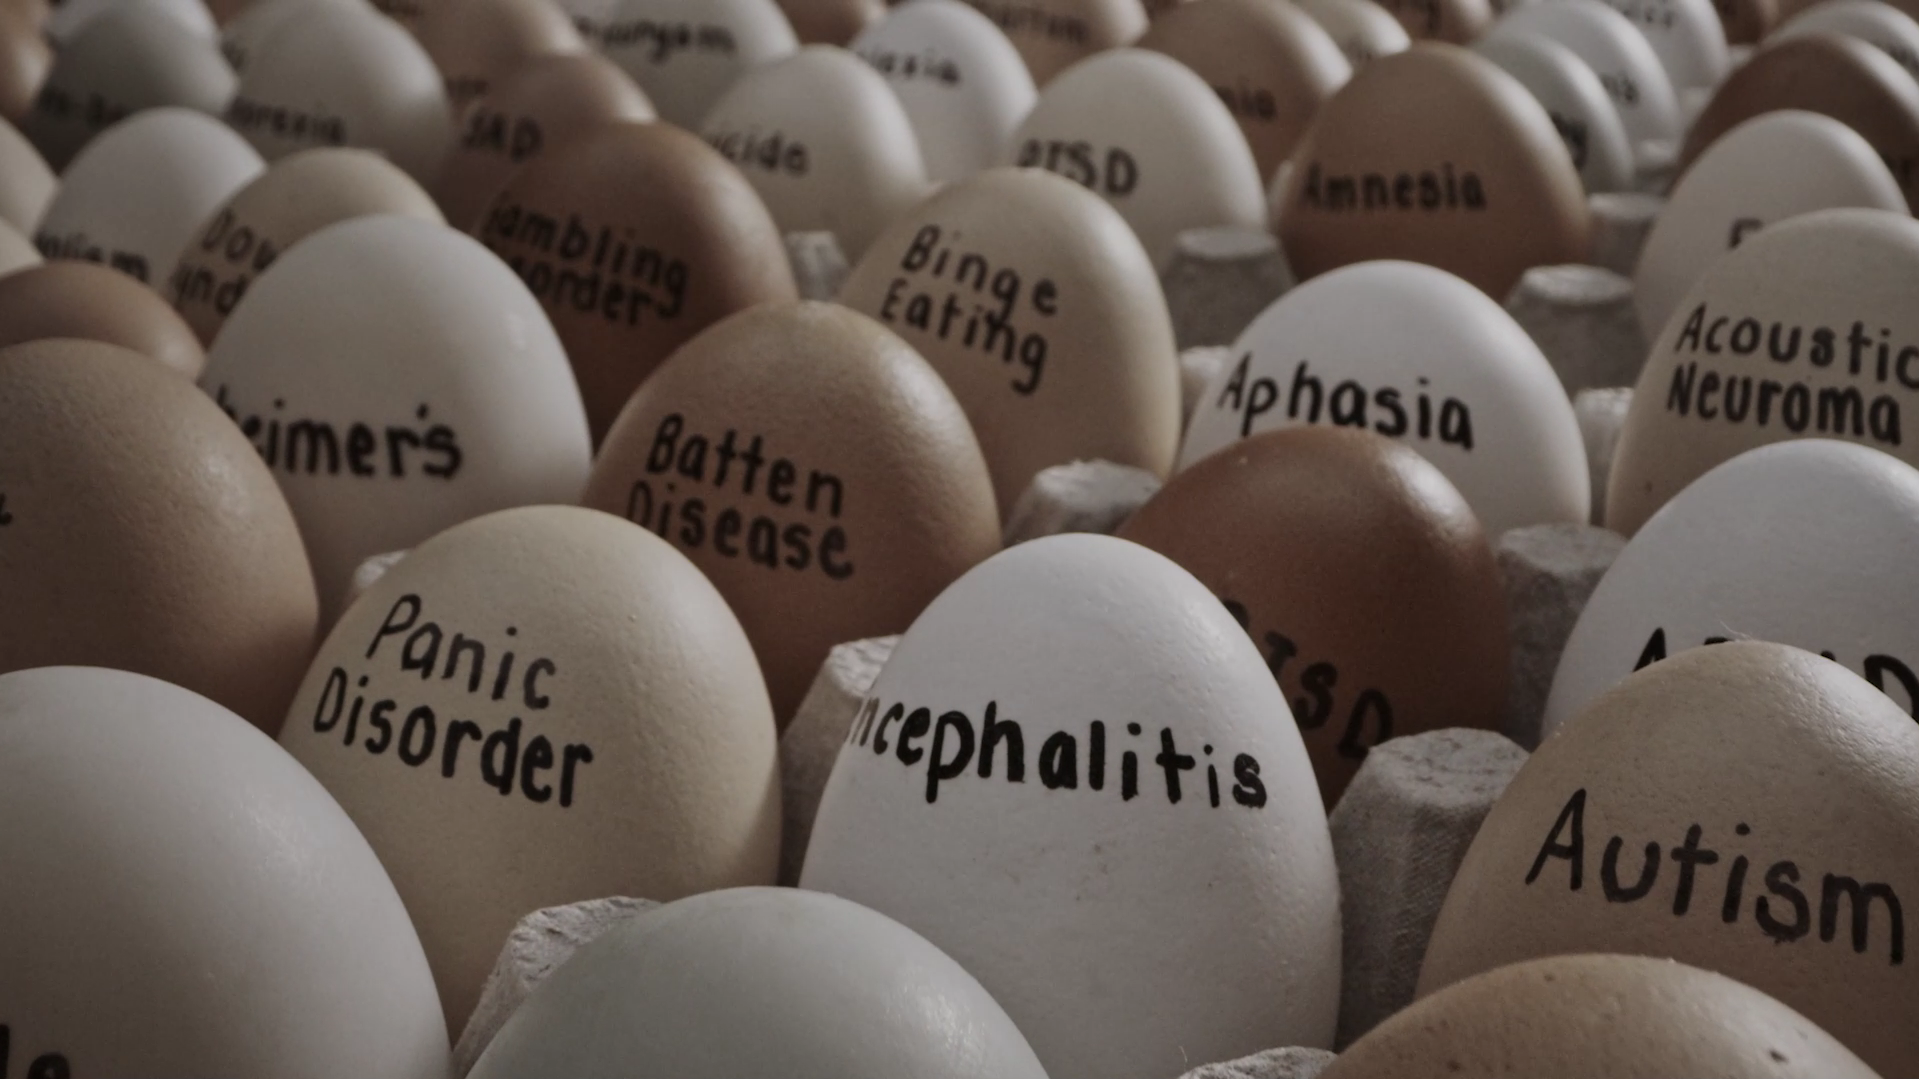 Eggs Are a Metaphor for Brain and Mental Health Disorders in United Brain Association’s Latest Campaign